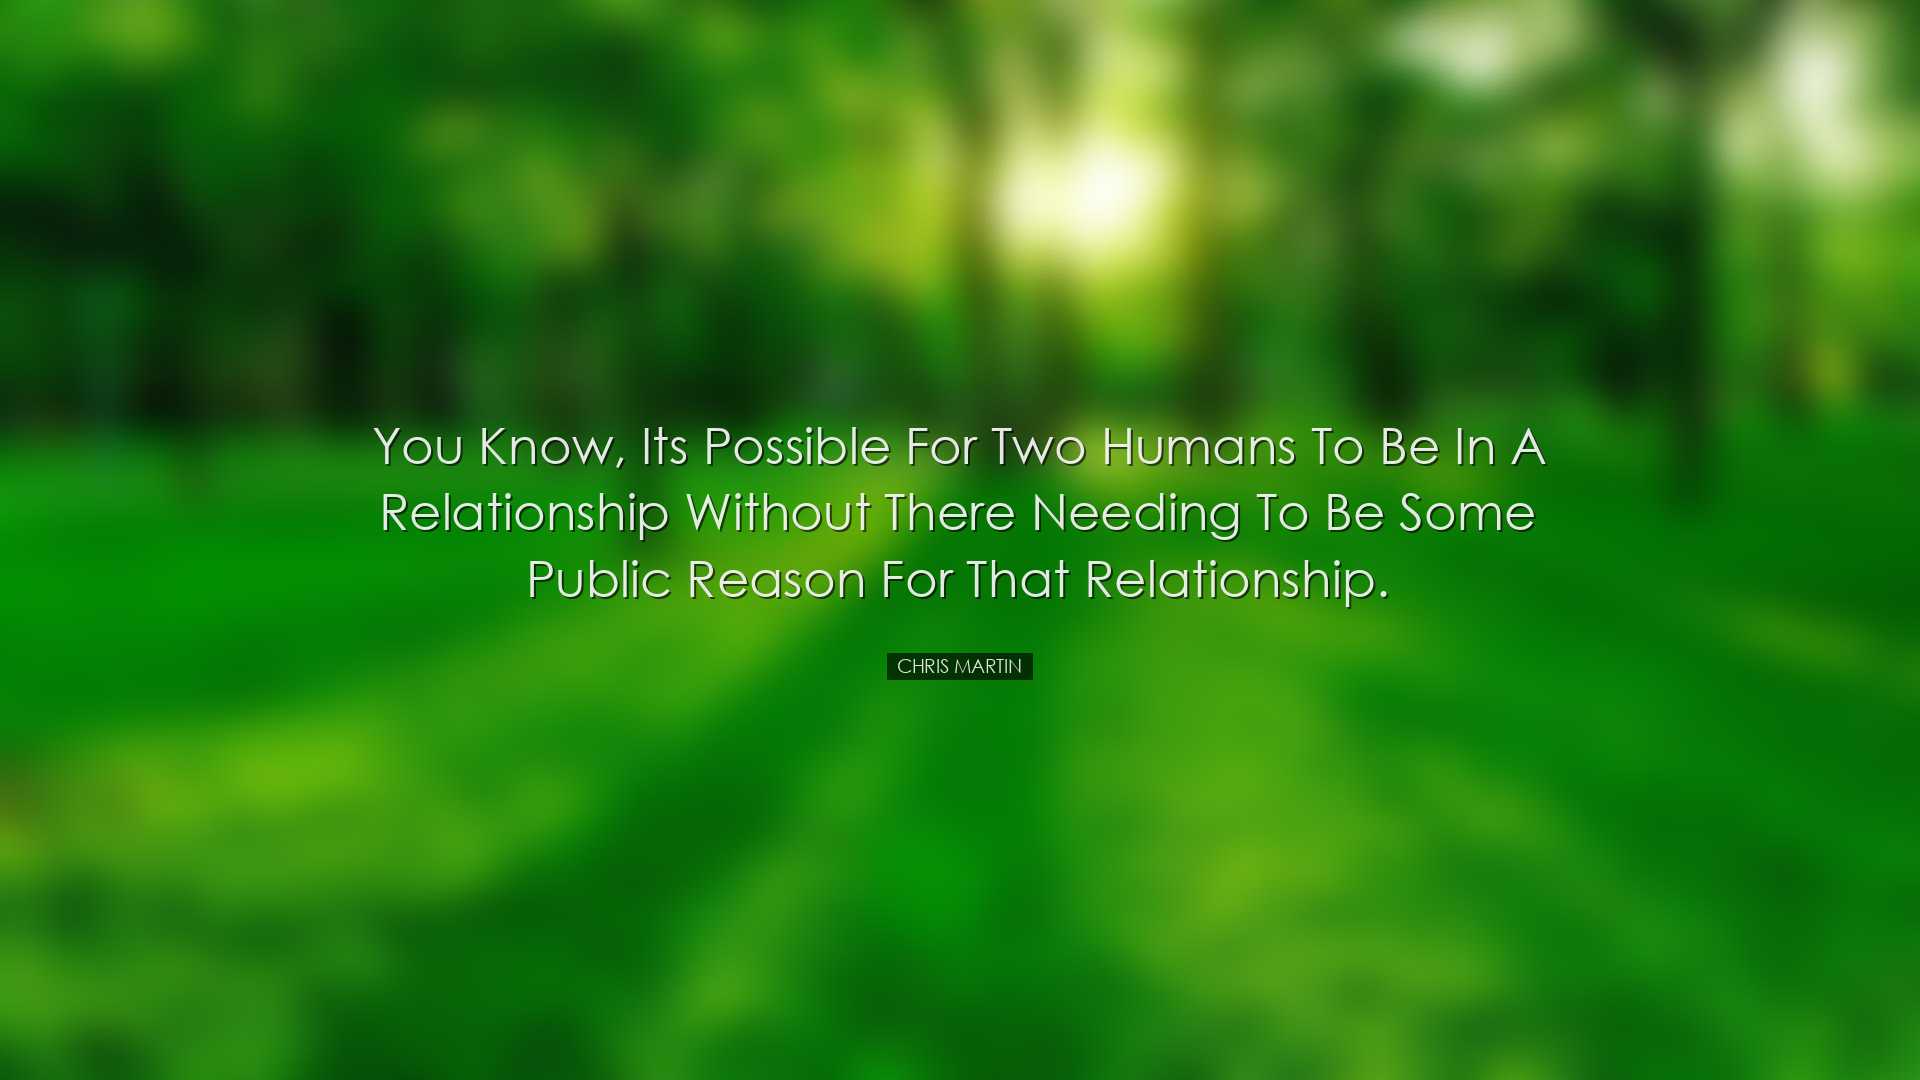 You know, its possible for two humans to be in a relationship with